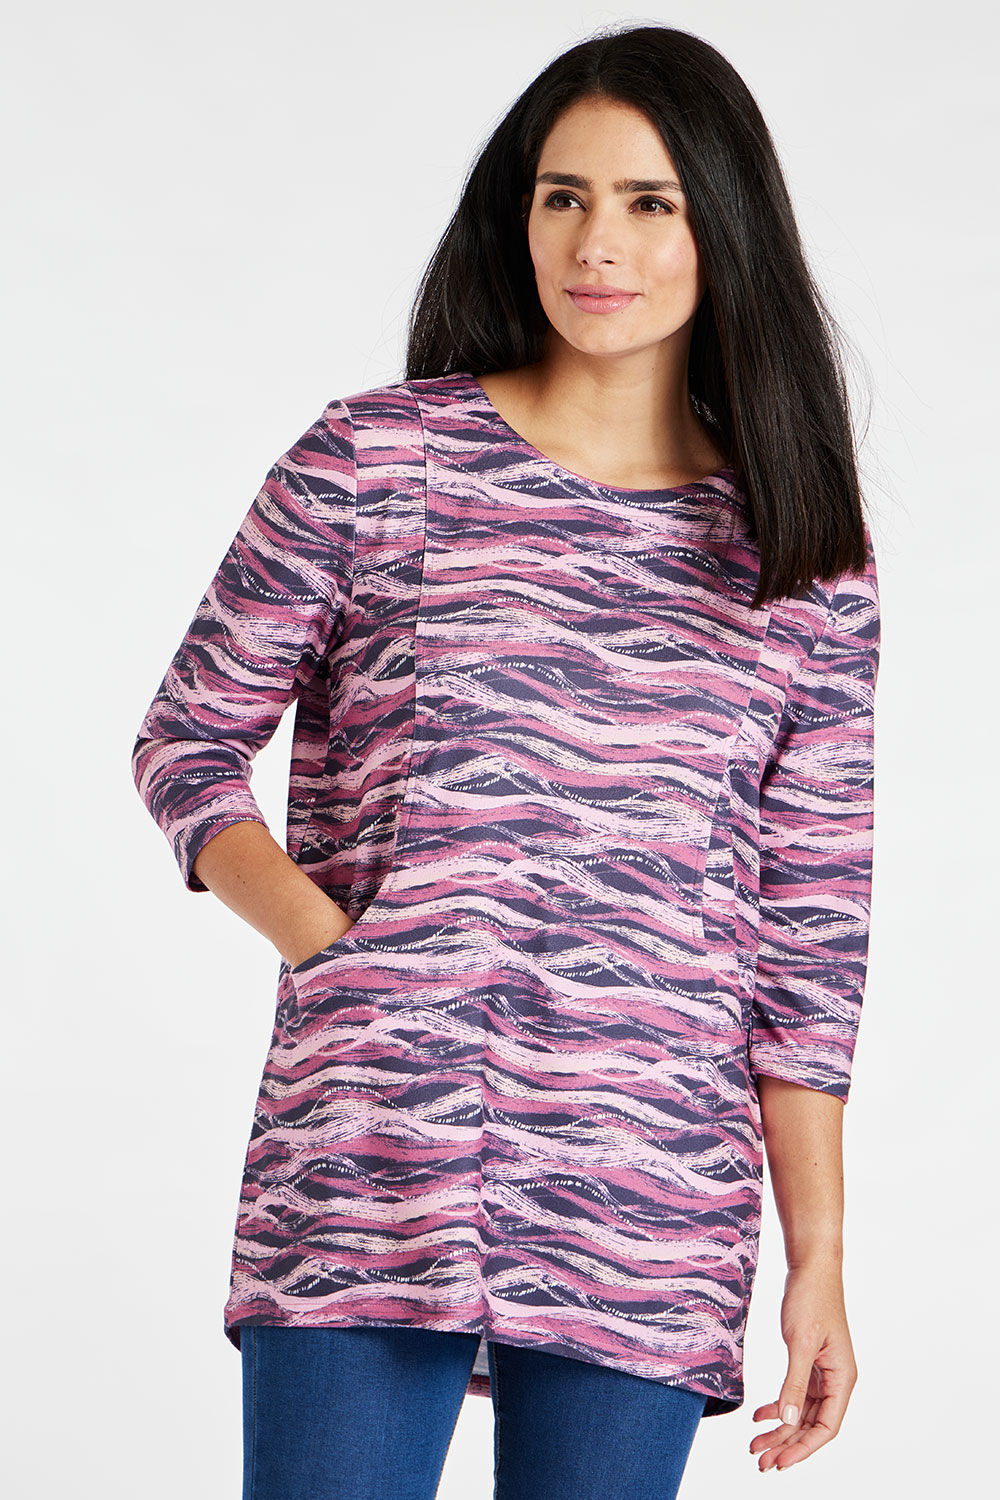 Bonmarche Women’s Pink Striped 3/4 Sleeve Wavy Print Soft Touch Tunic with Pocket Detail, Size: 18